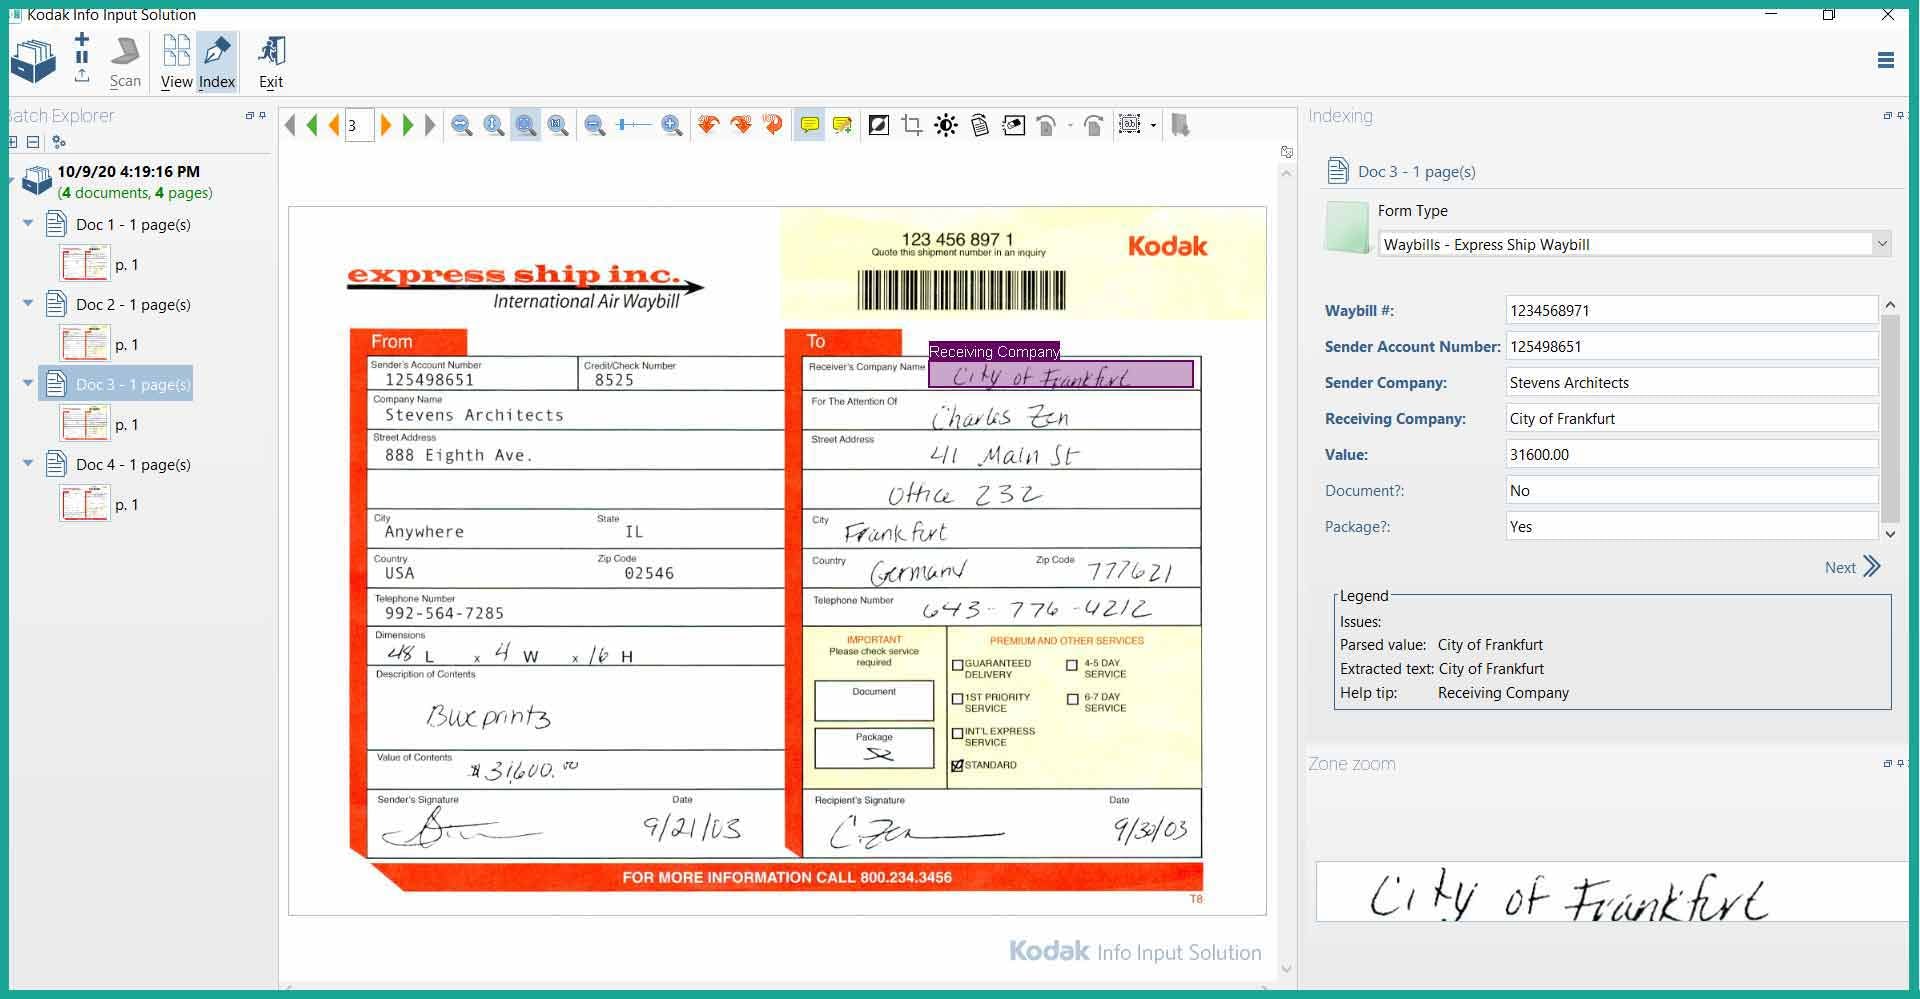 Kodak Info Input Solution Software - Ultra-accurate classification and extraction